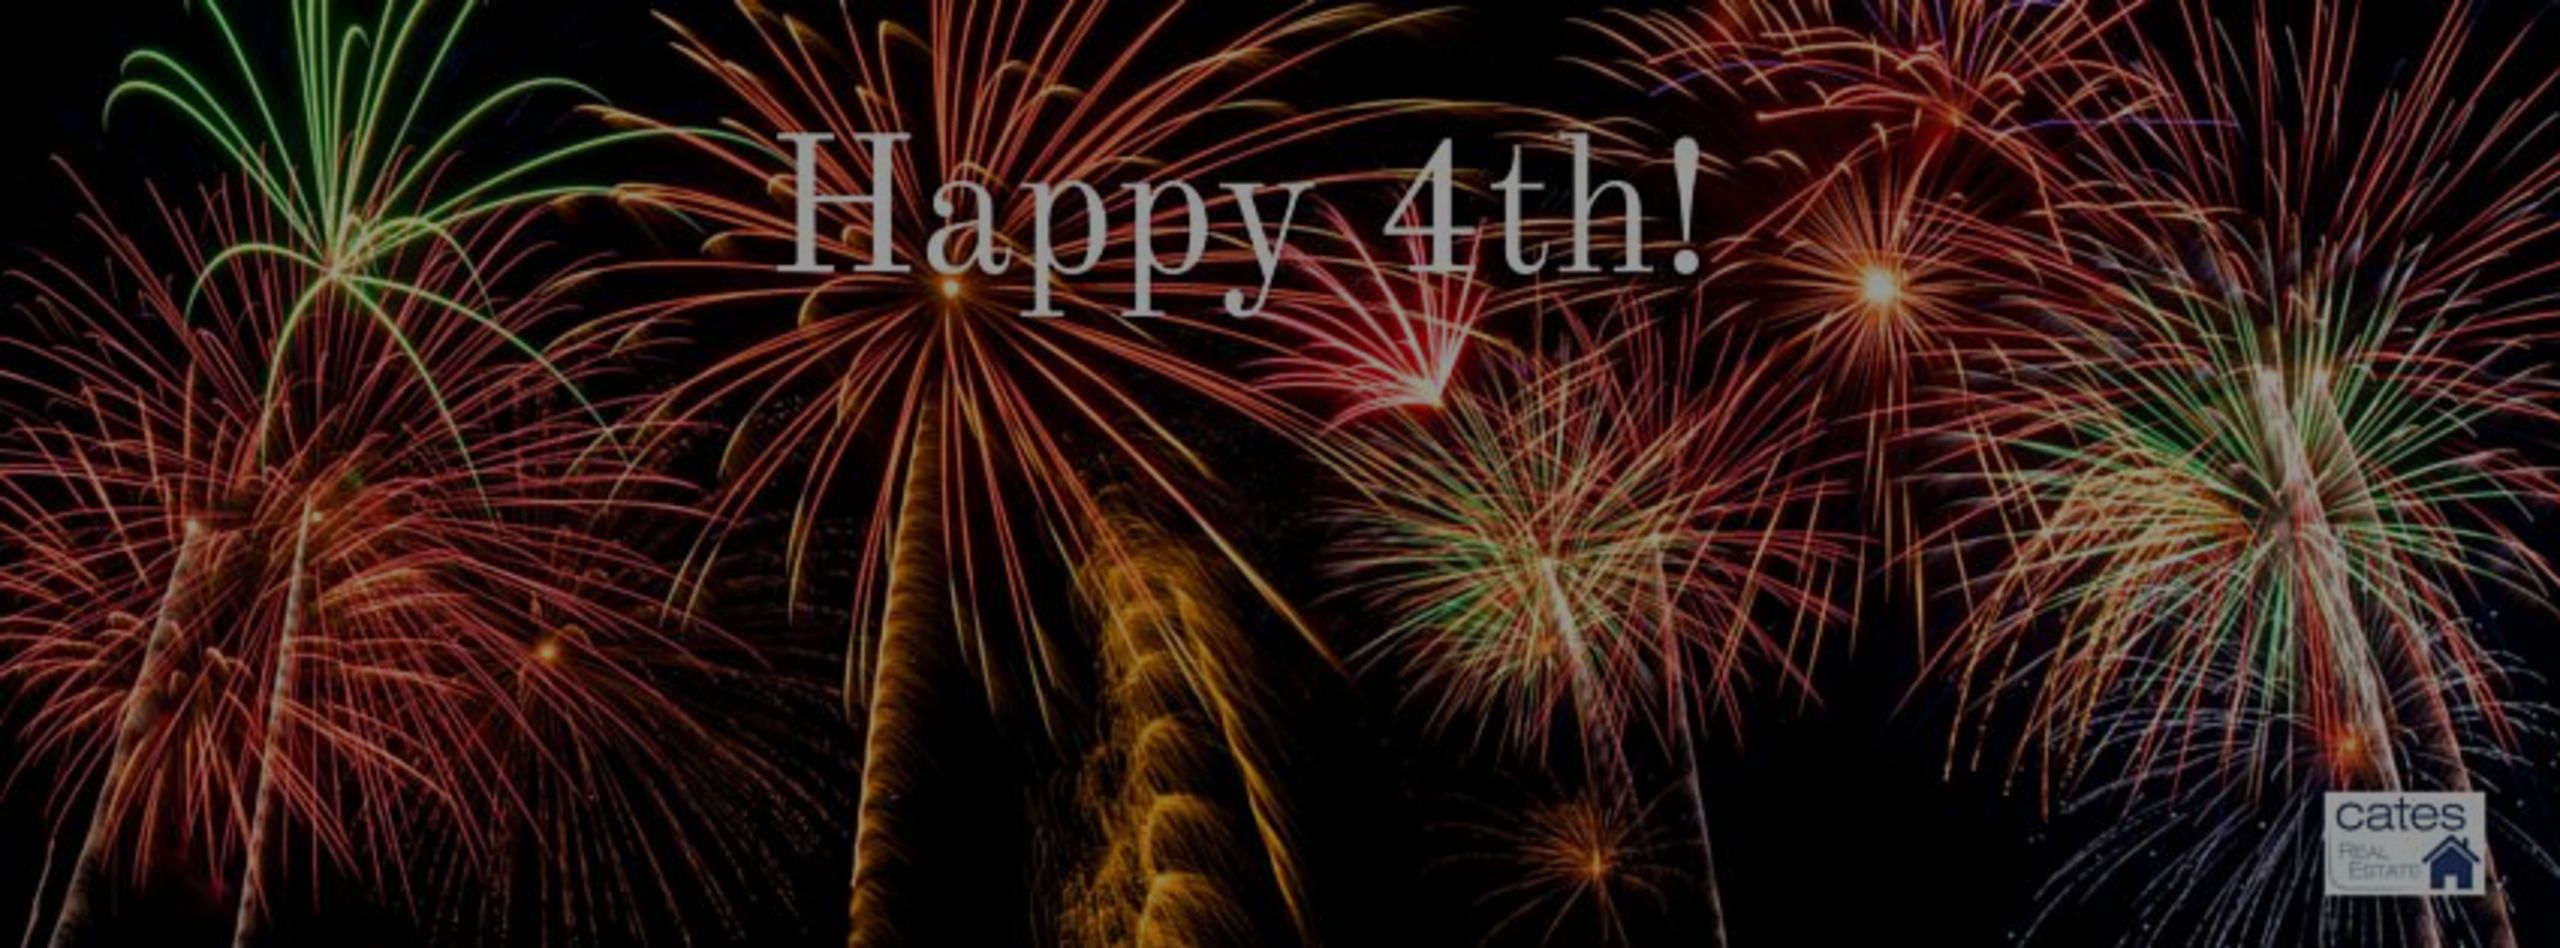 Fireworks and Activity Schedule: Forth of July 2015